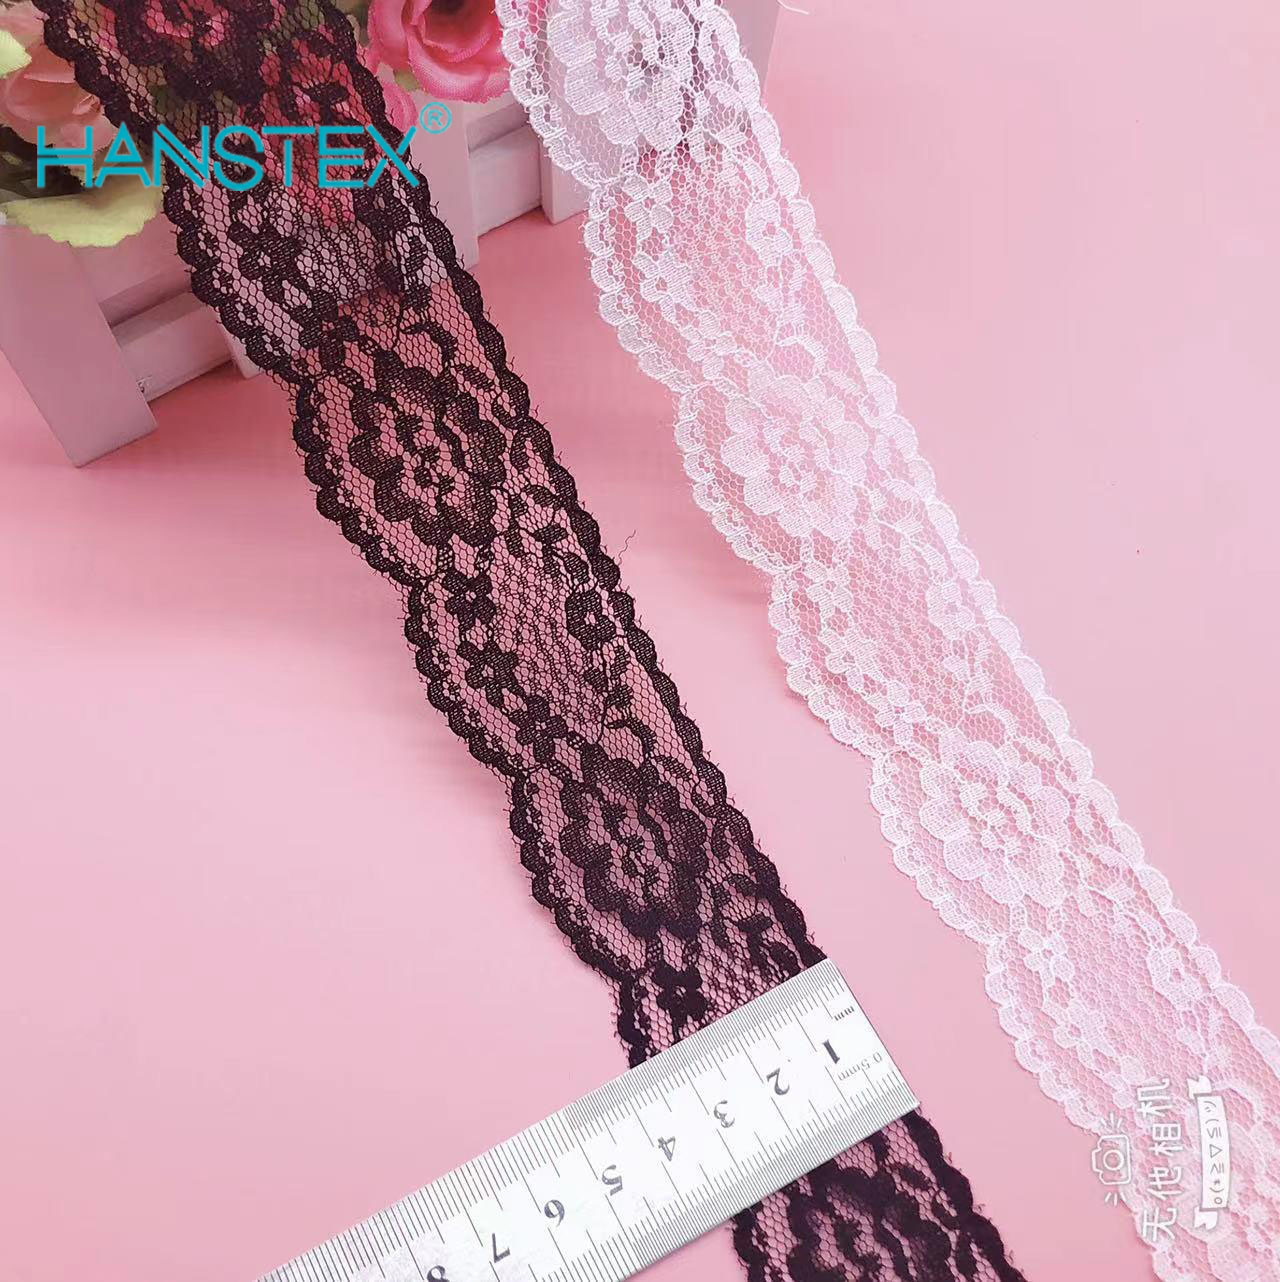 3-5cm Polyester Polyester No Elastic Lace Trimming Lace Fabric Fringe